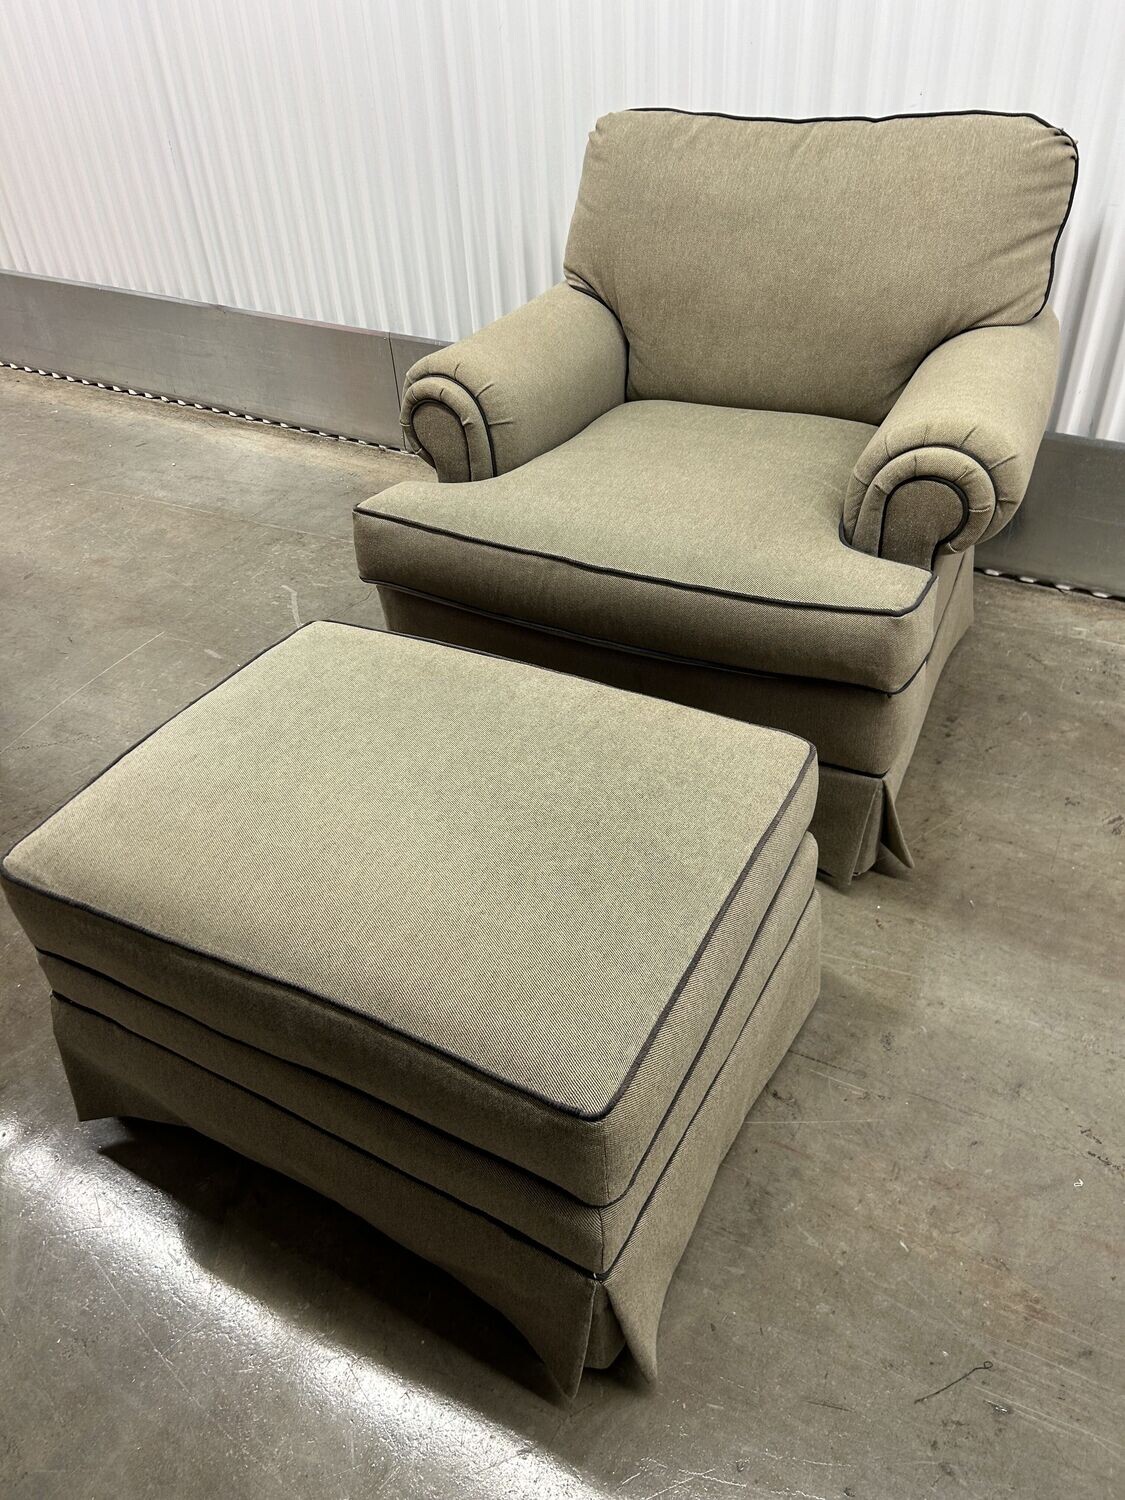 Comfy Arm Chair & Ottoman, contrast piping #2322 ** 1 wk. to sell, full price